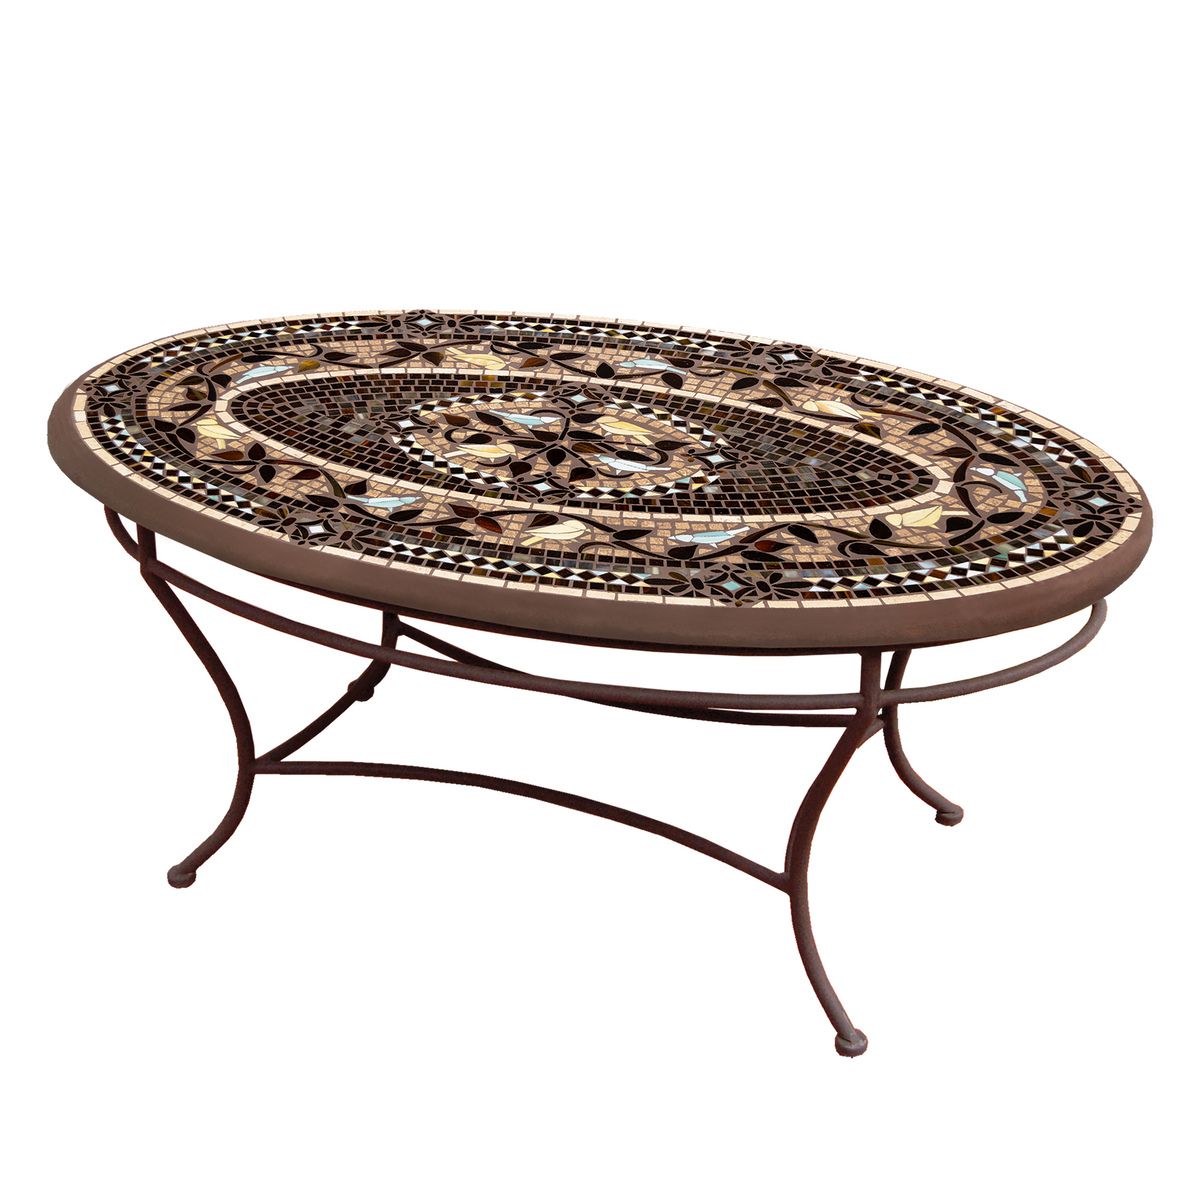 Provence Mosaic Coffee Table - Oval-Iron Accents